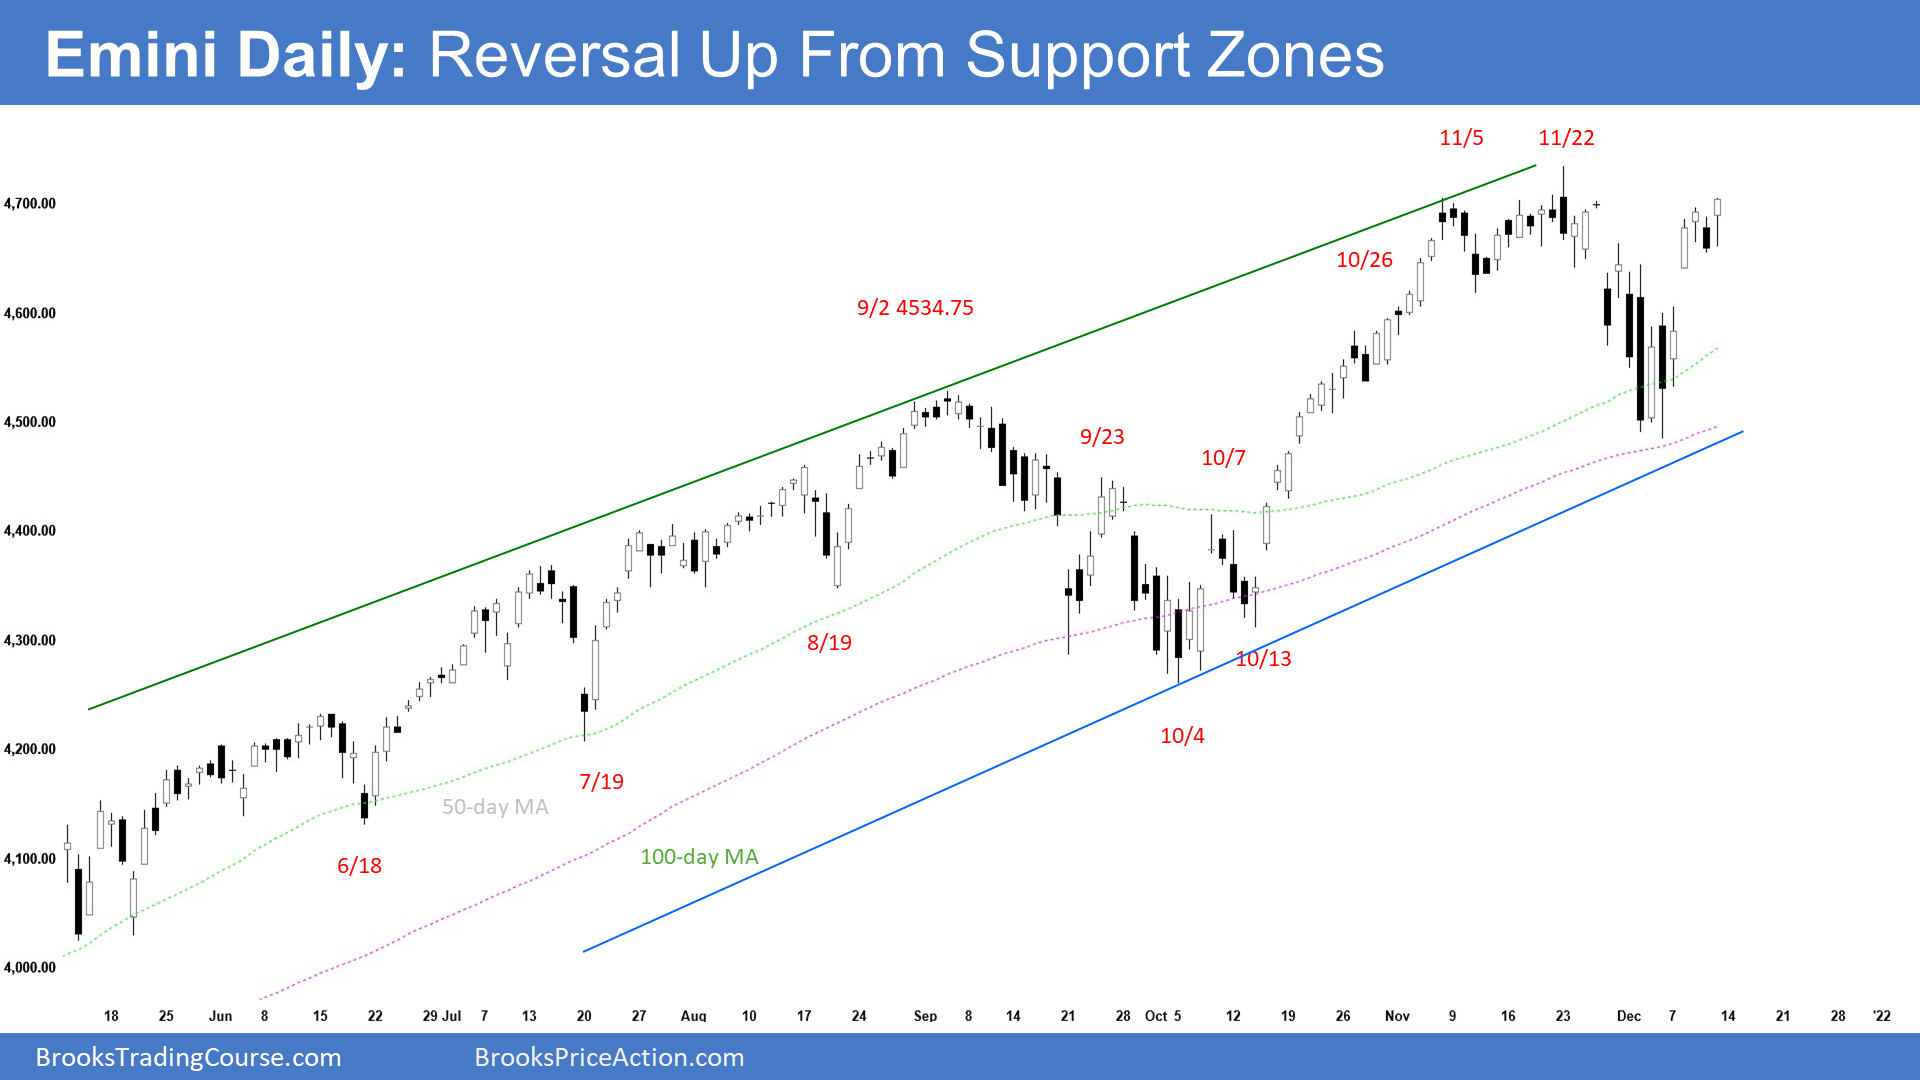 SP500 Emini Daily Chart Reversal Up from Support Zones